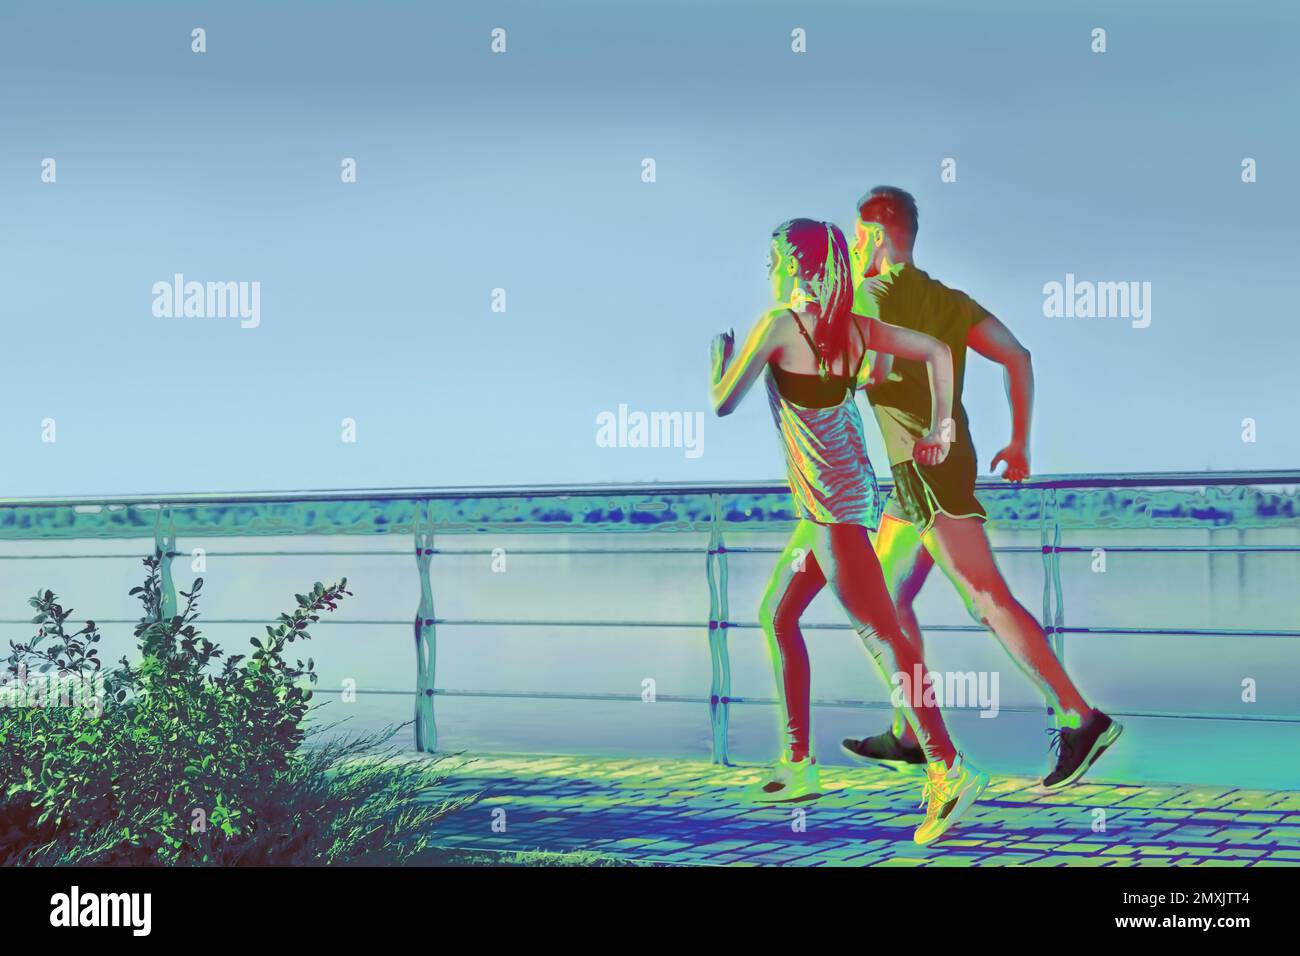 People running outdoors, view through thermal camera. Temperature detection - Covid spreading prevention measure Stock Photo